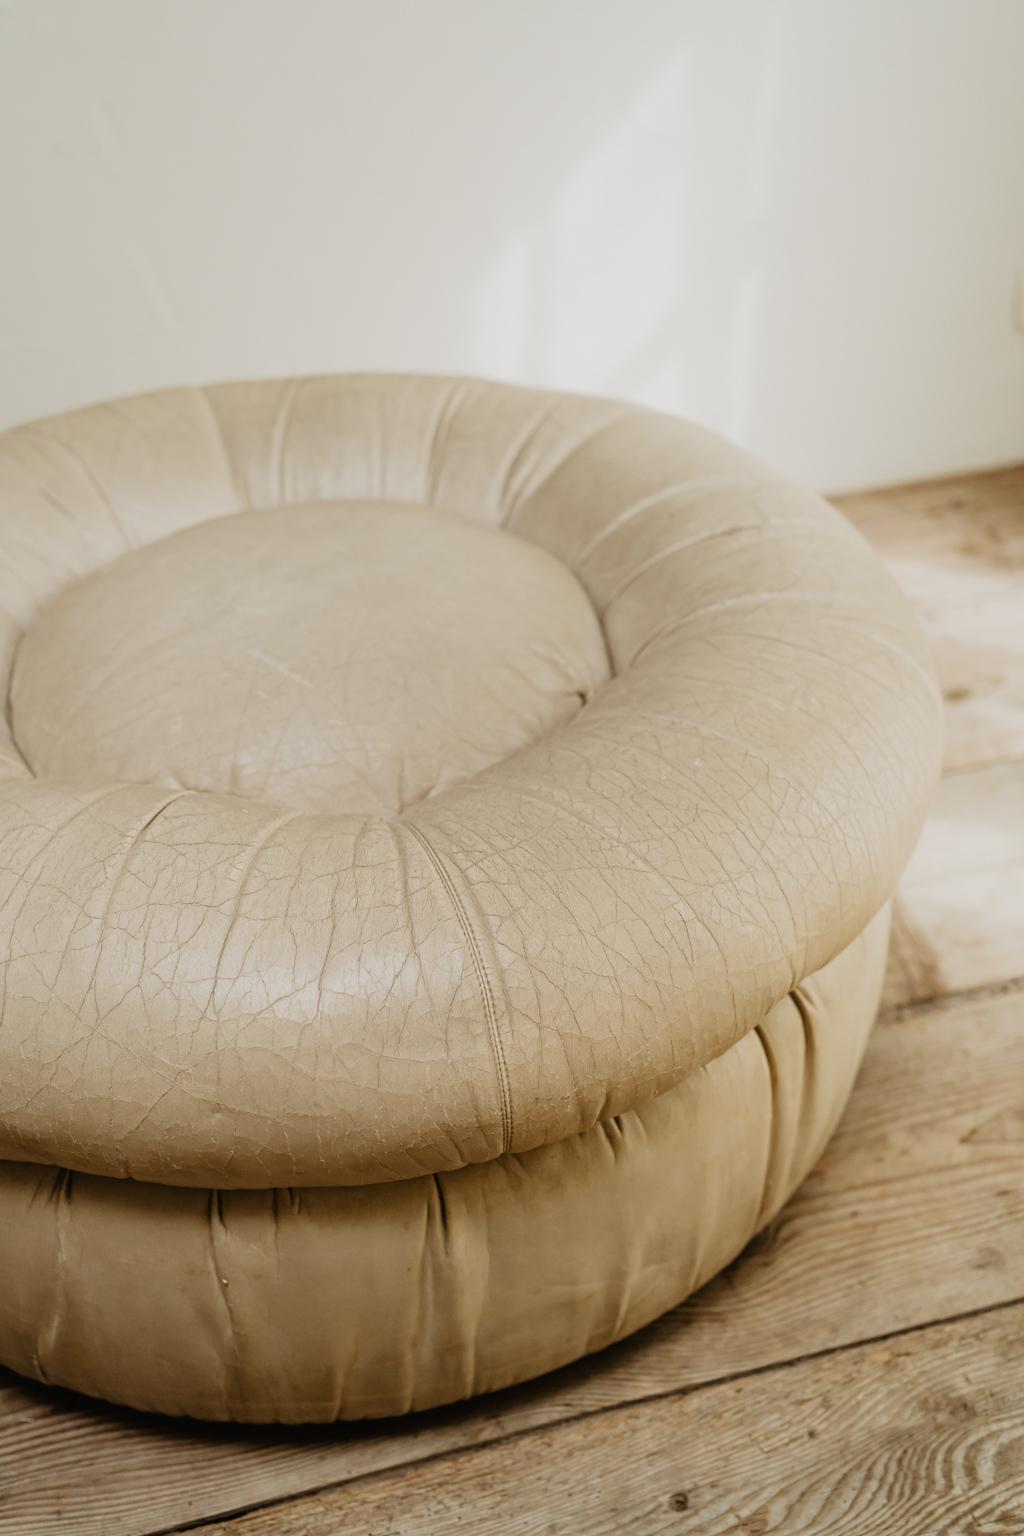 Lots of charm this leather pouf/ottoman from the 1970s.